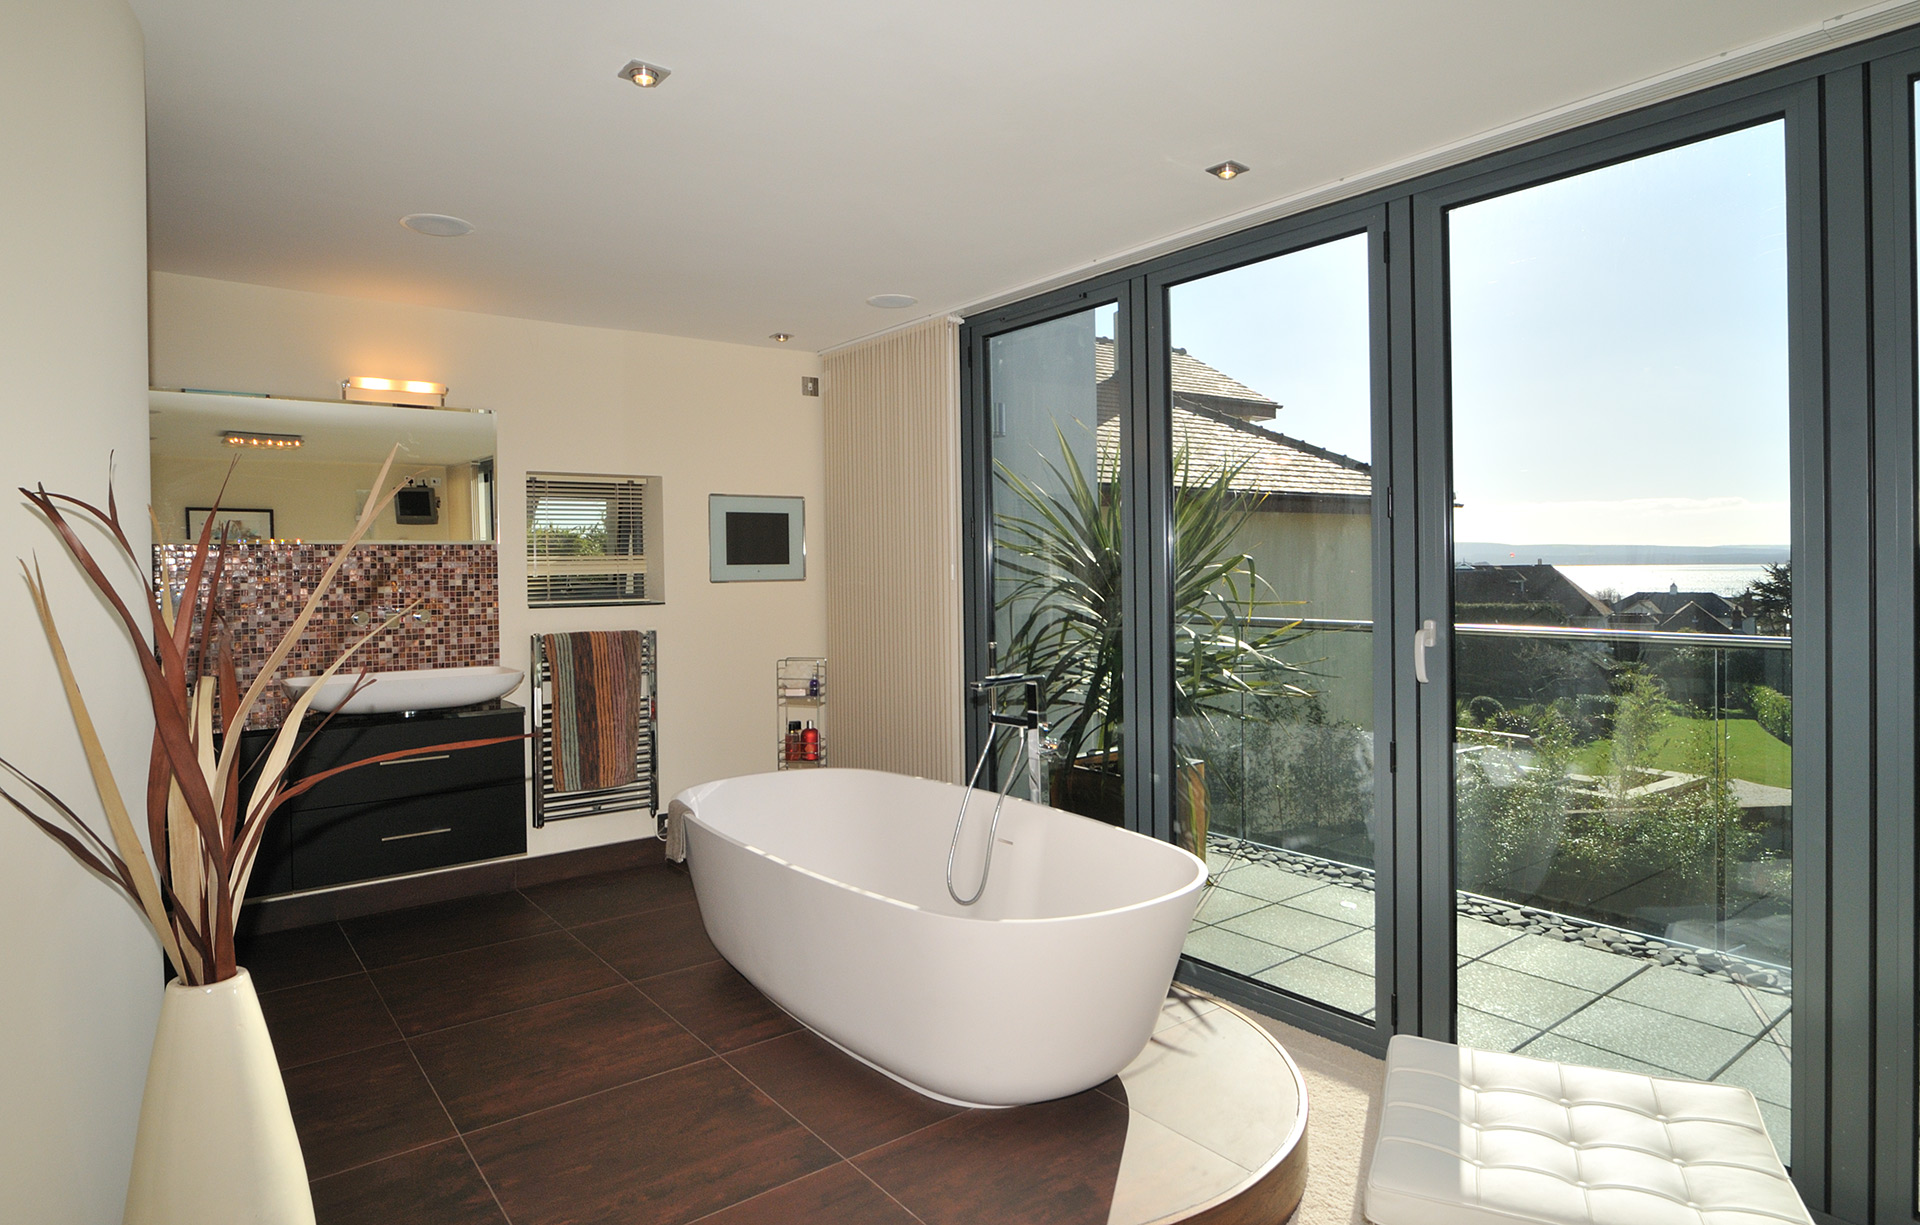 free standing bath with glass double doors leading to balcony with sea views